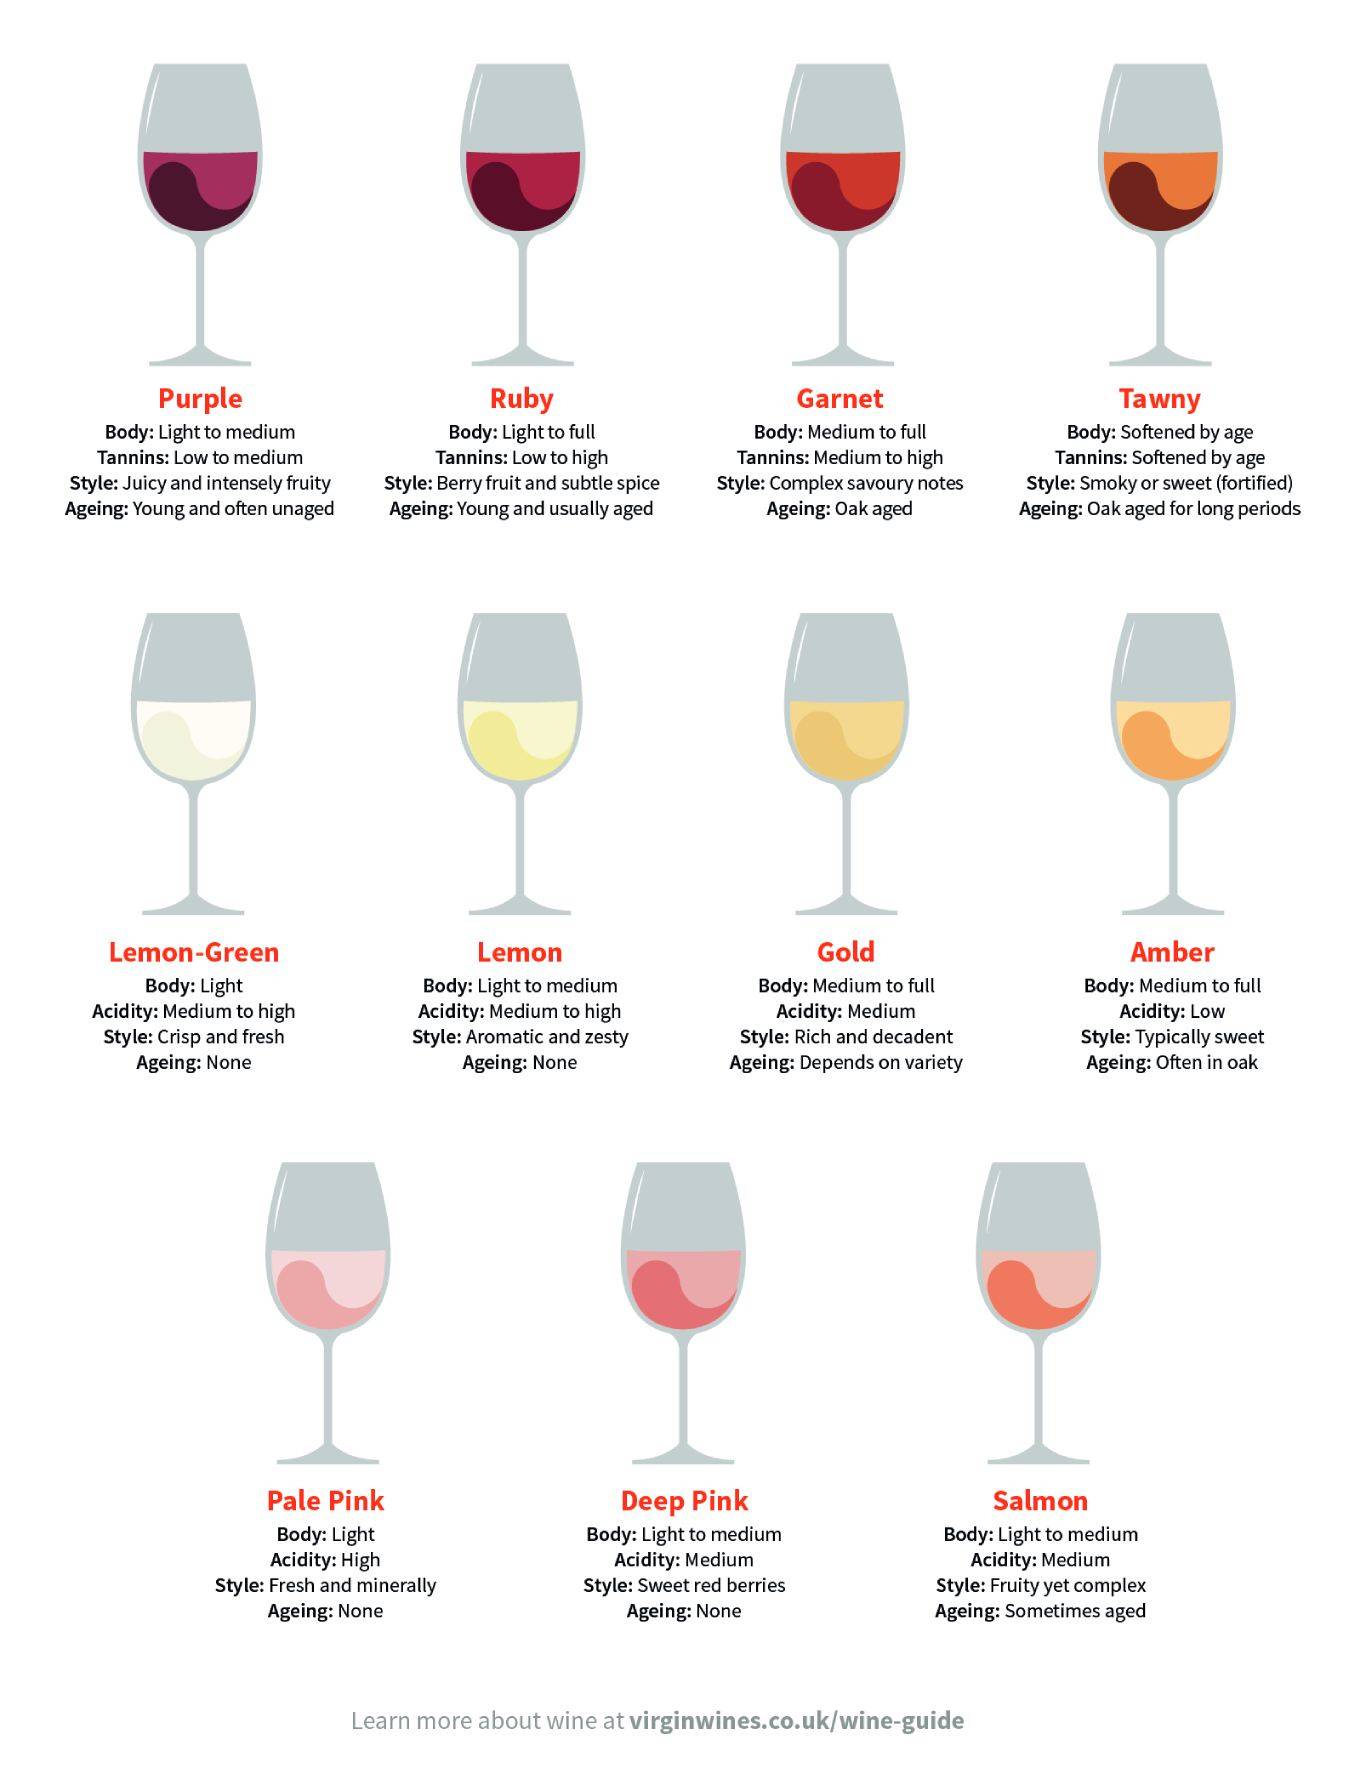 The Colours of Wine infographic by Virgin Wines